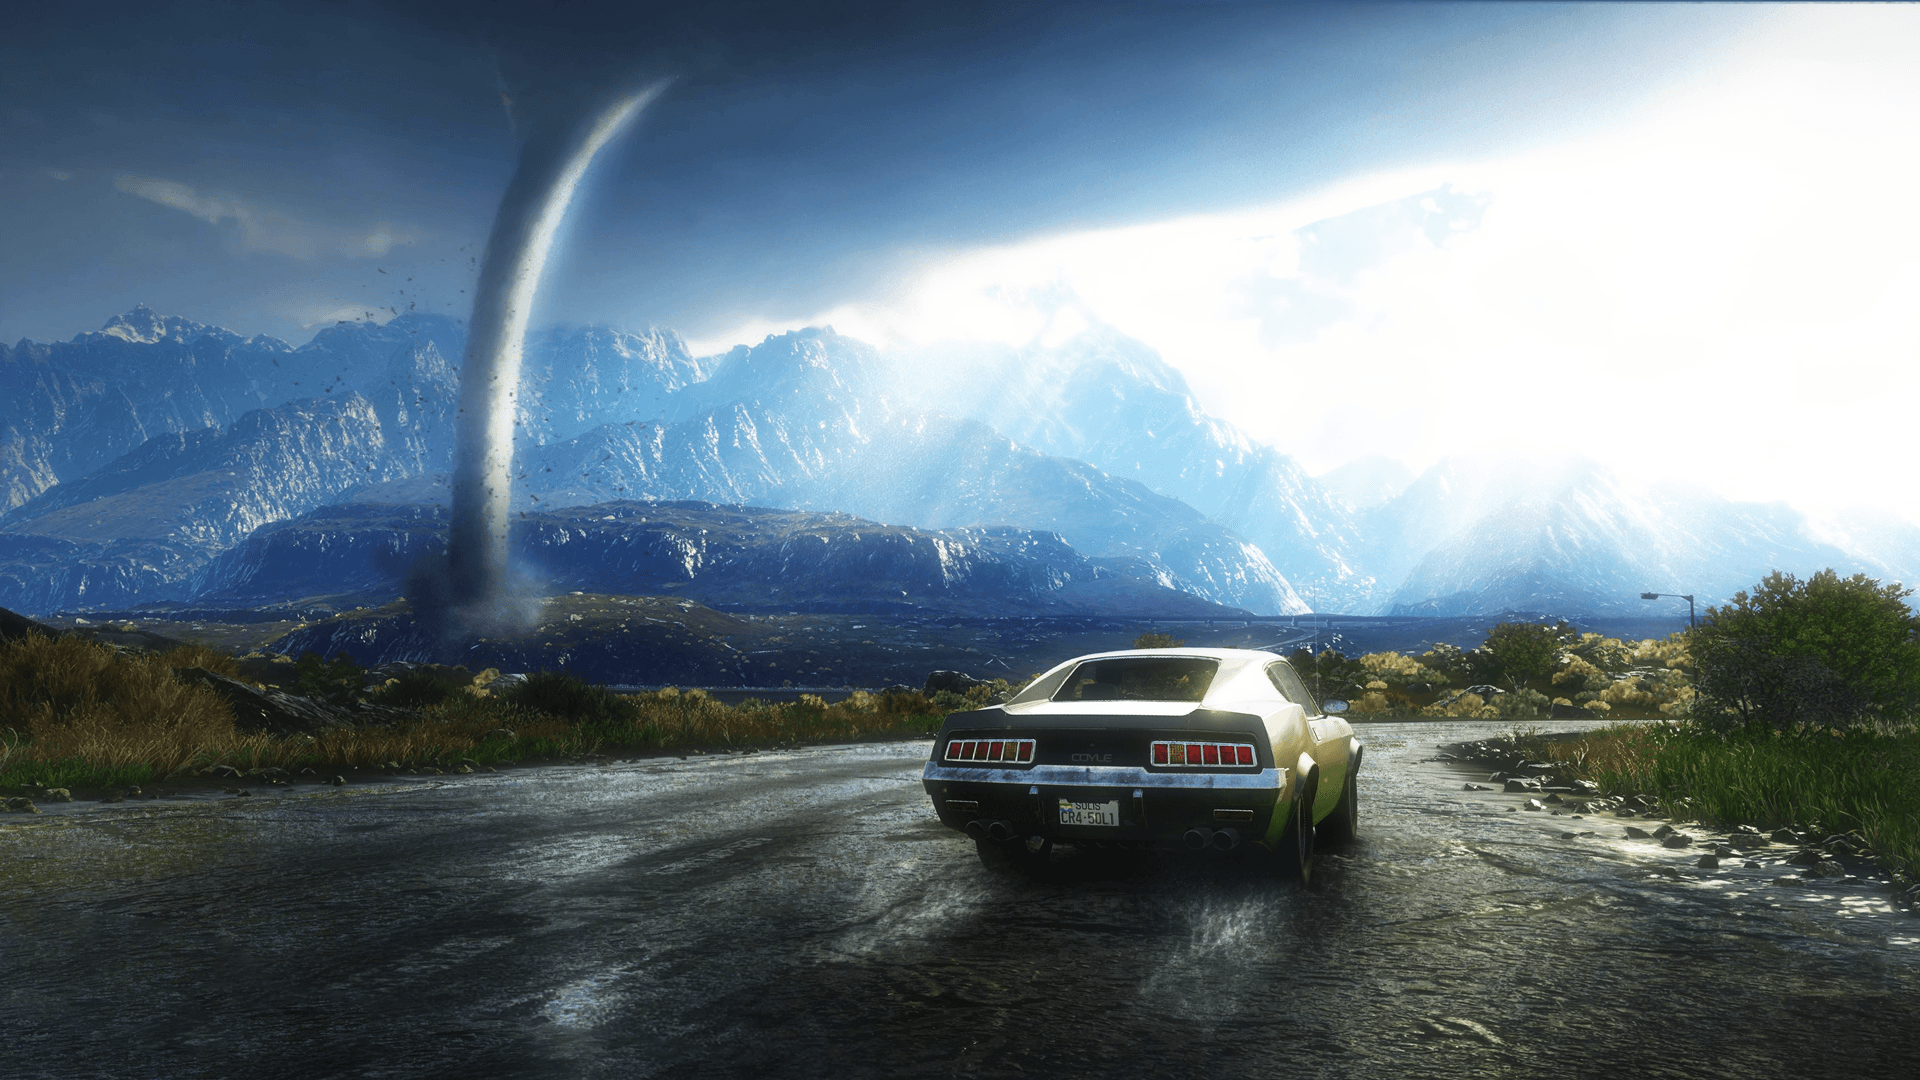 Slightly edited Just Cause 4 wallpaper 1080p, more in comments